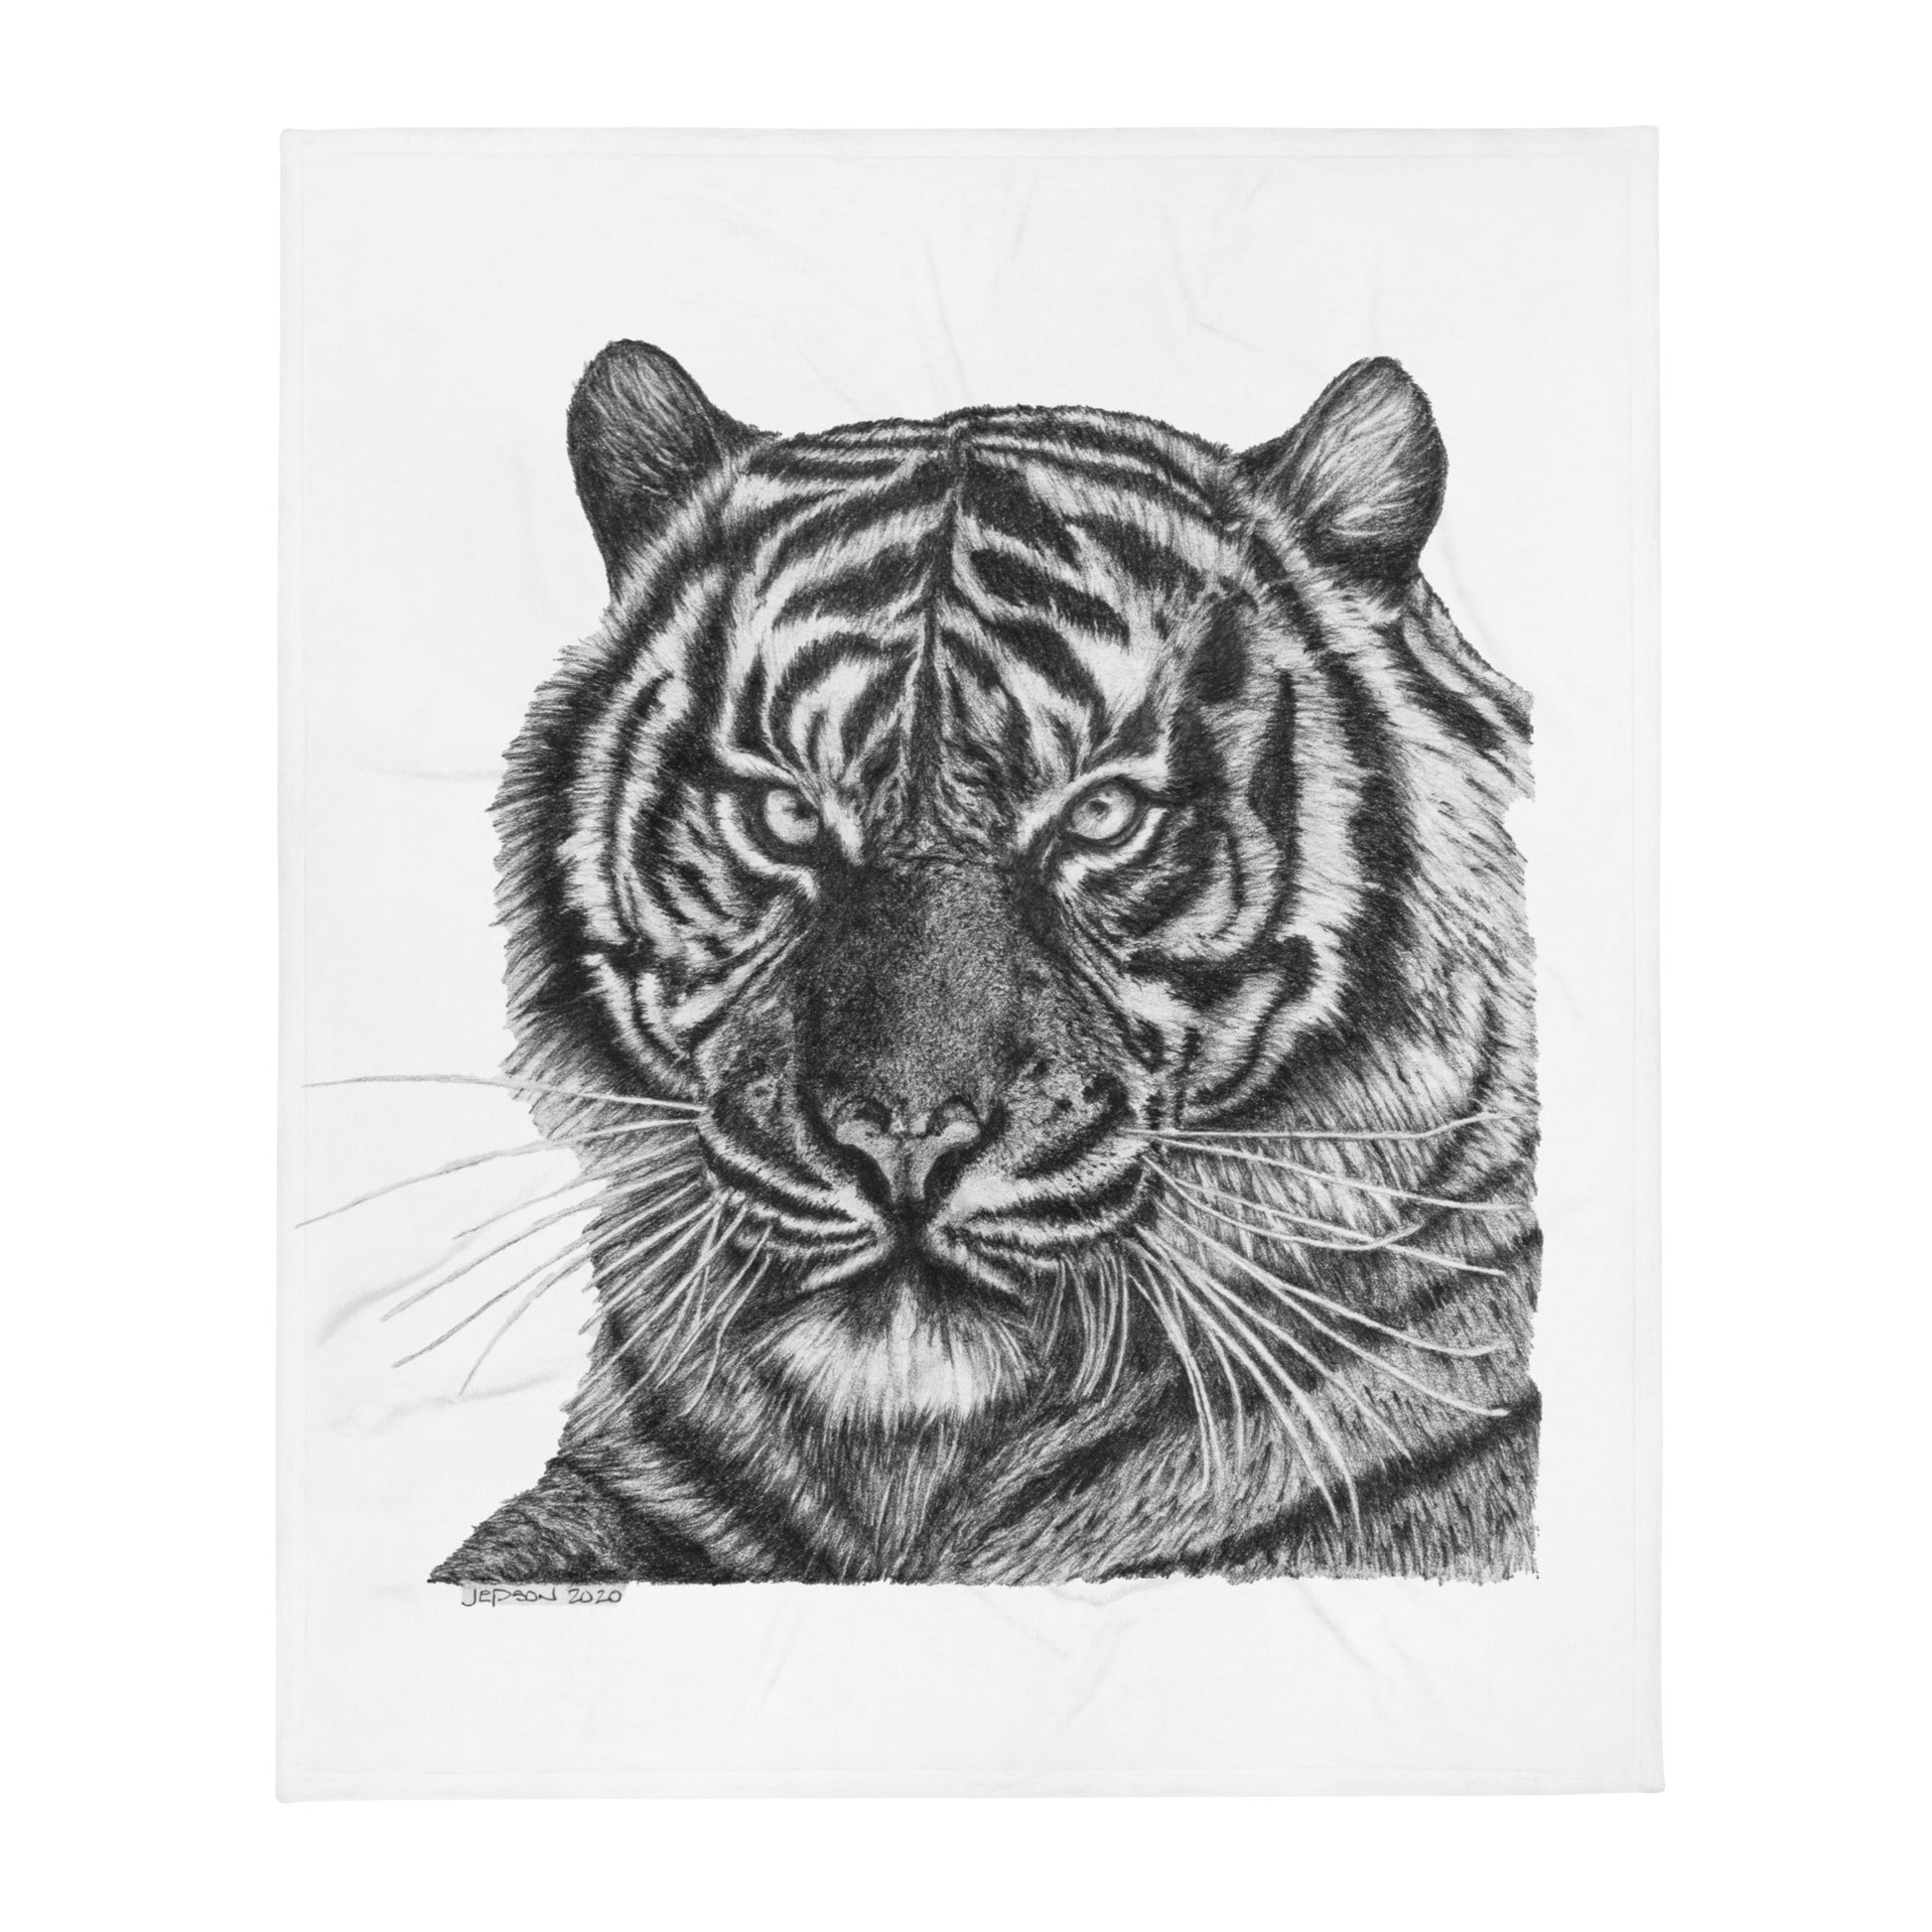 This "Tiger Throw Blanket" is from a drawing of mine created with a graphite pencil. It has been digitally optimized and transferred to a 100% Polyester throw blanket.